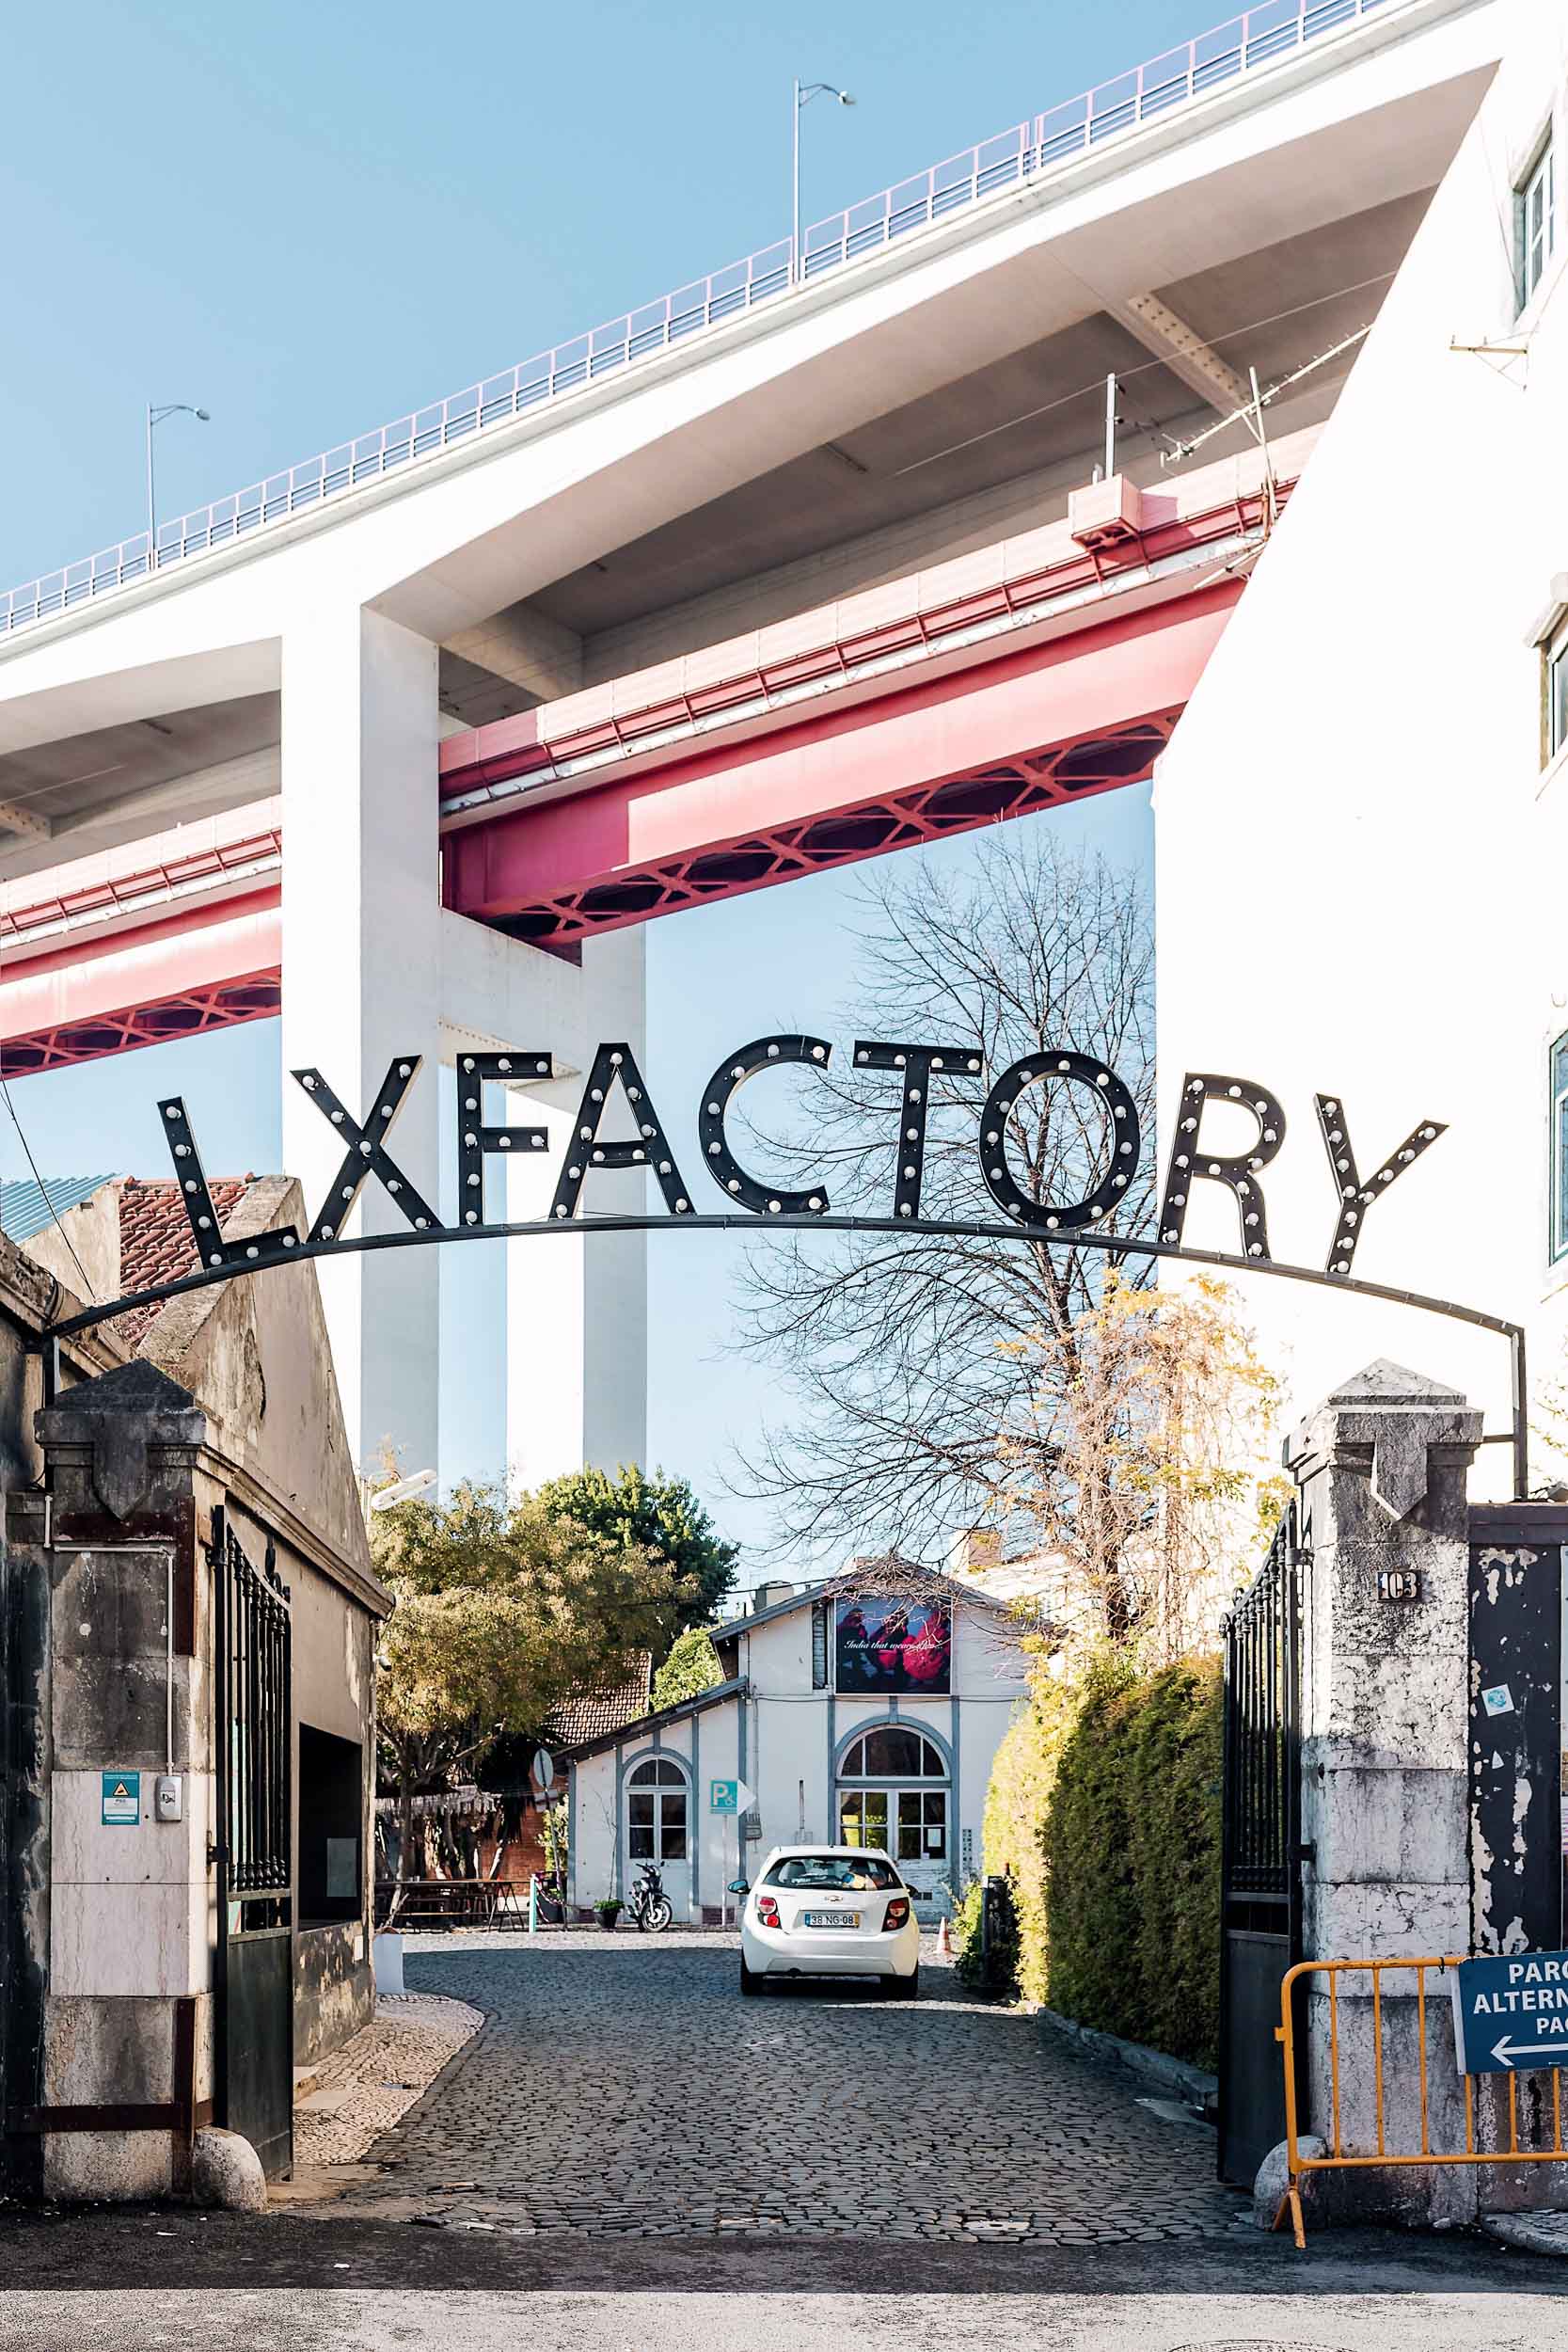 LX Factory is an art center in Lisbon, full of artsy retailers and great restaurants